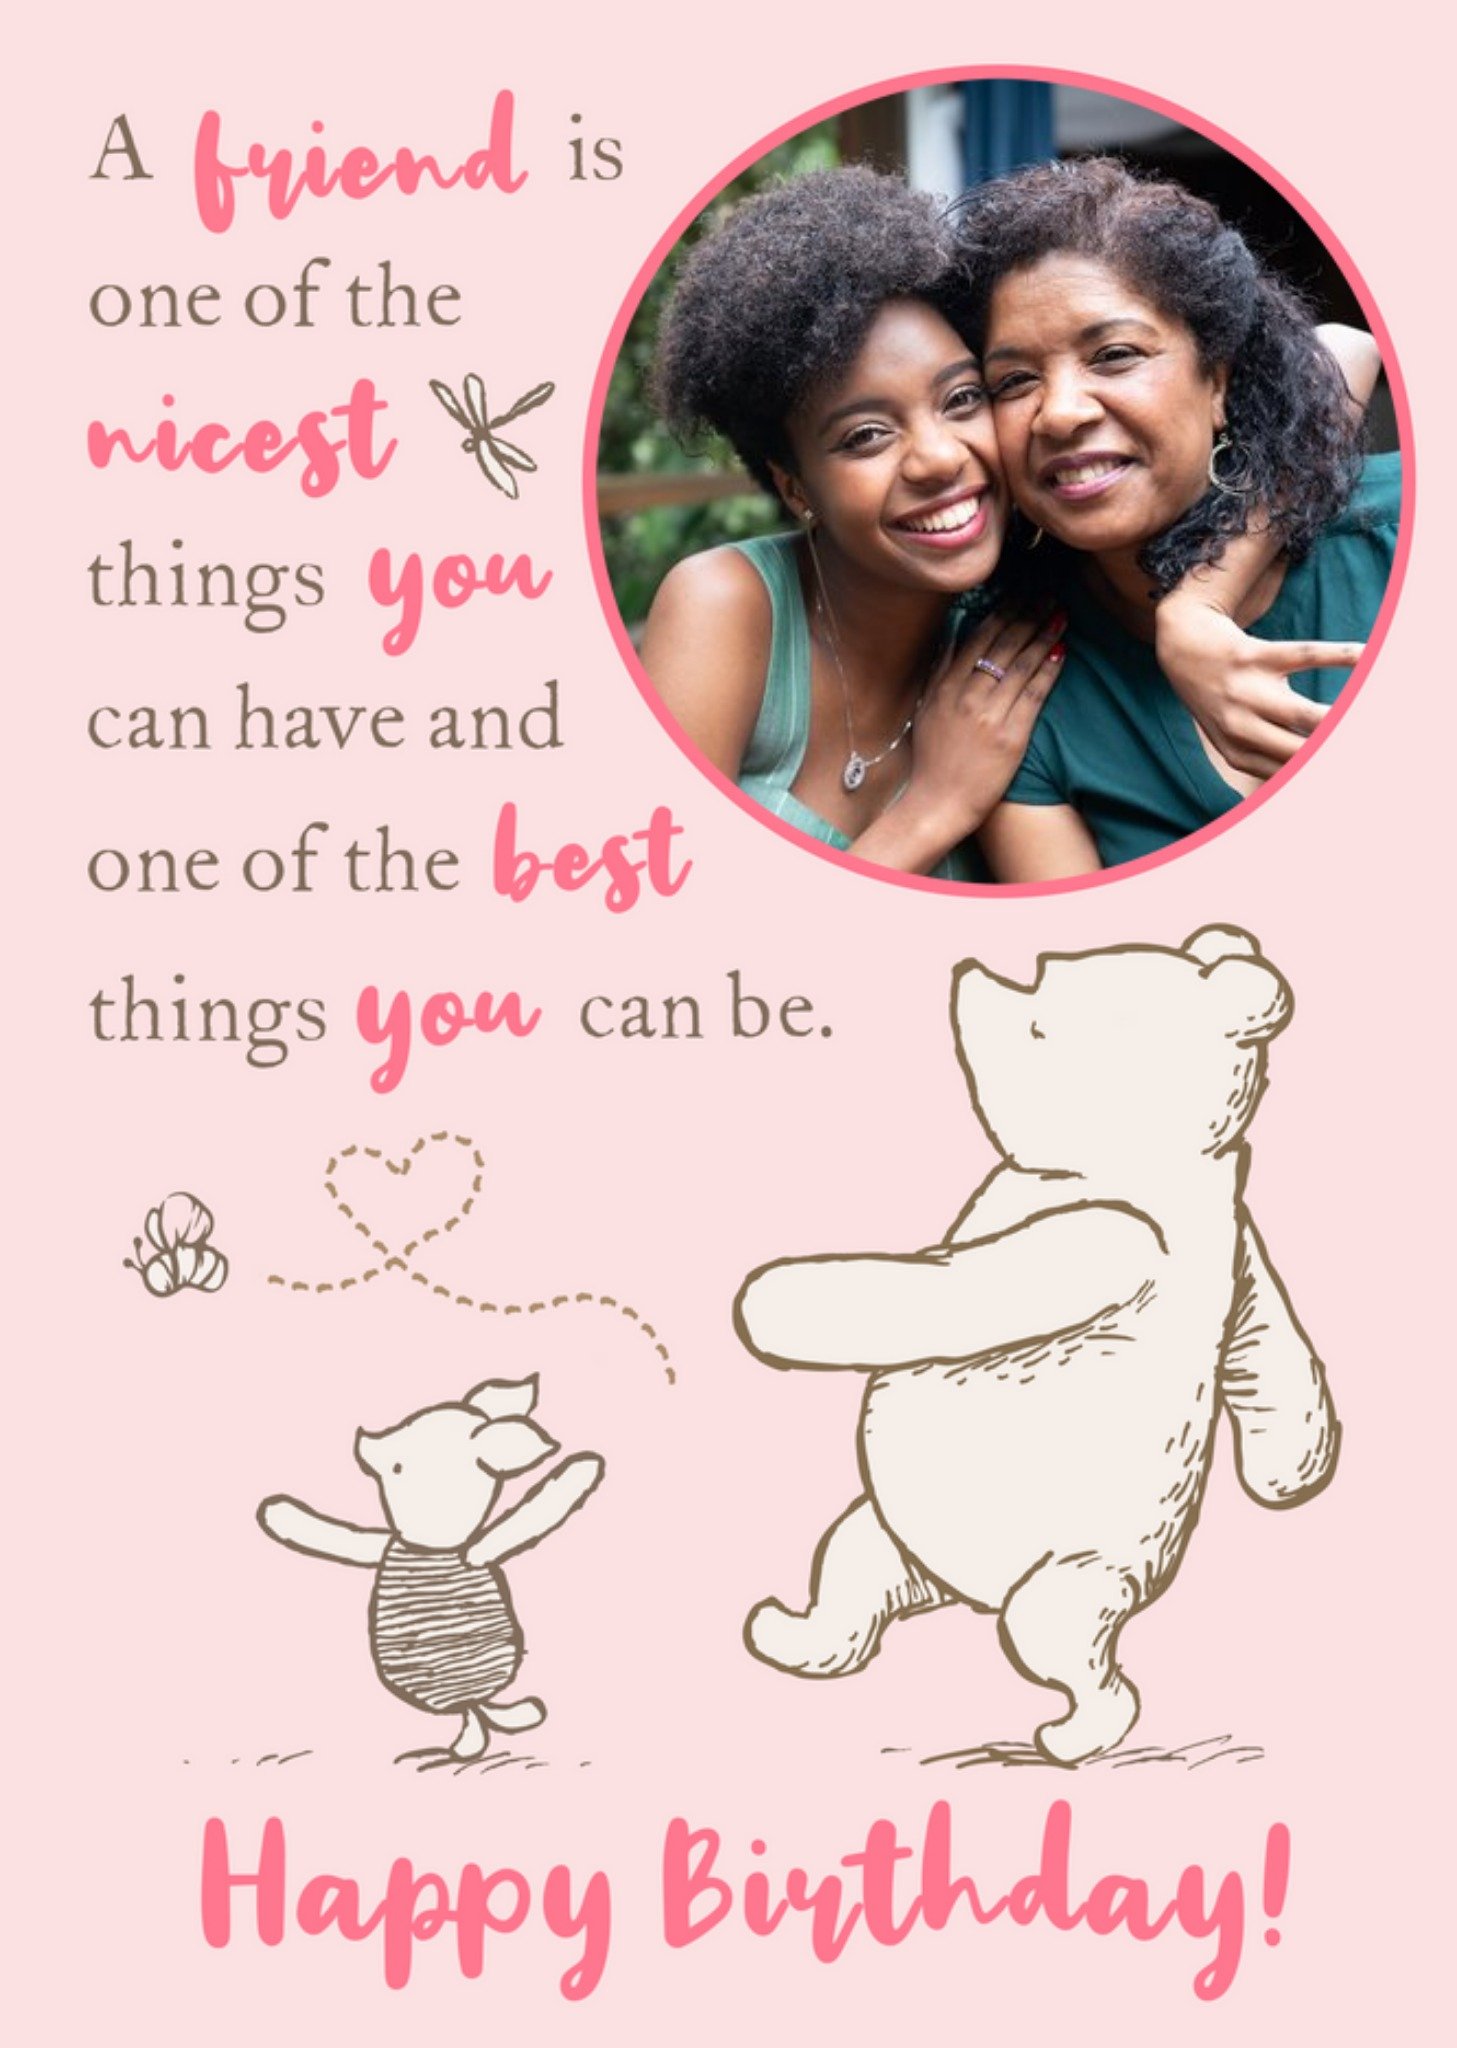 Winnie The Pooh A Friend Is One Of The Nicest Things You Can Have Photo Upload Birthday Card Ecard